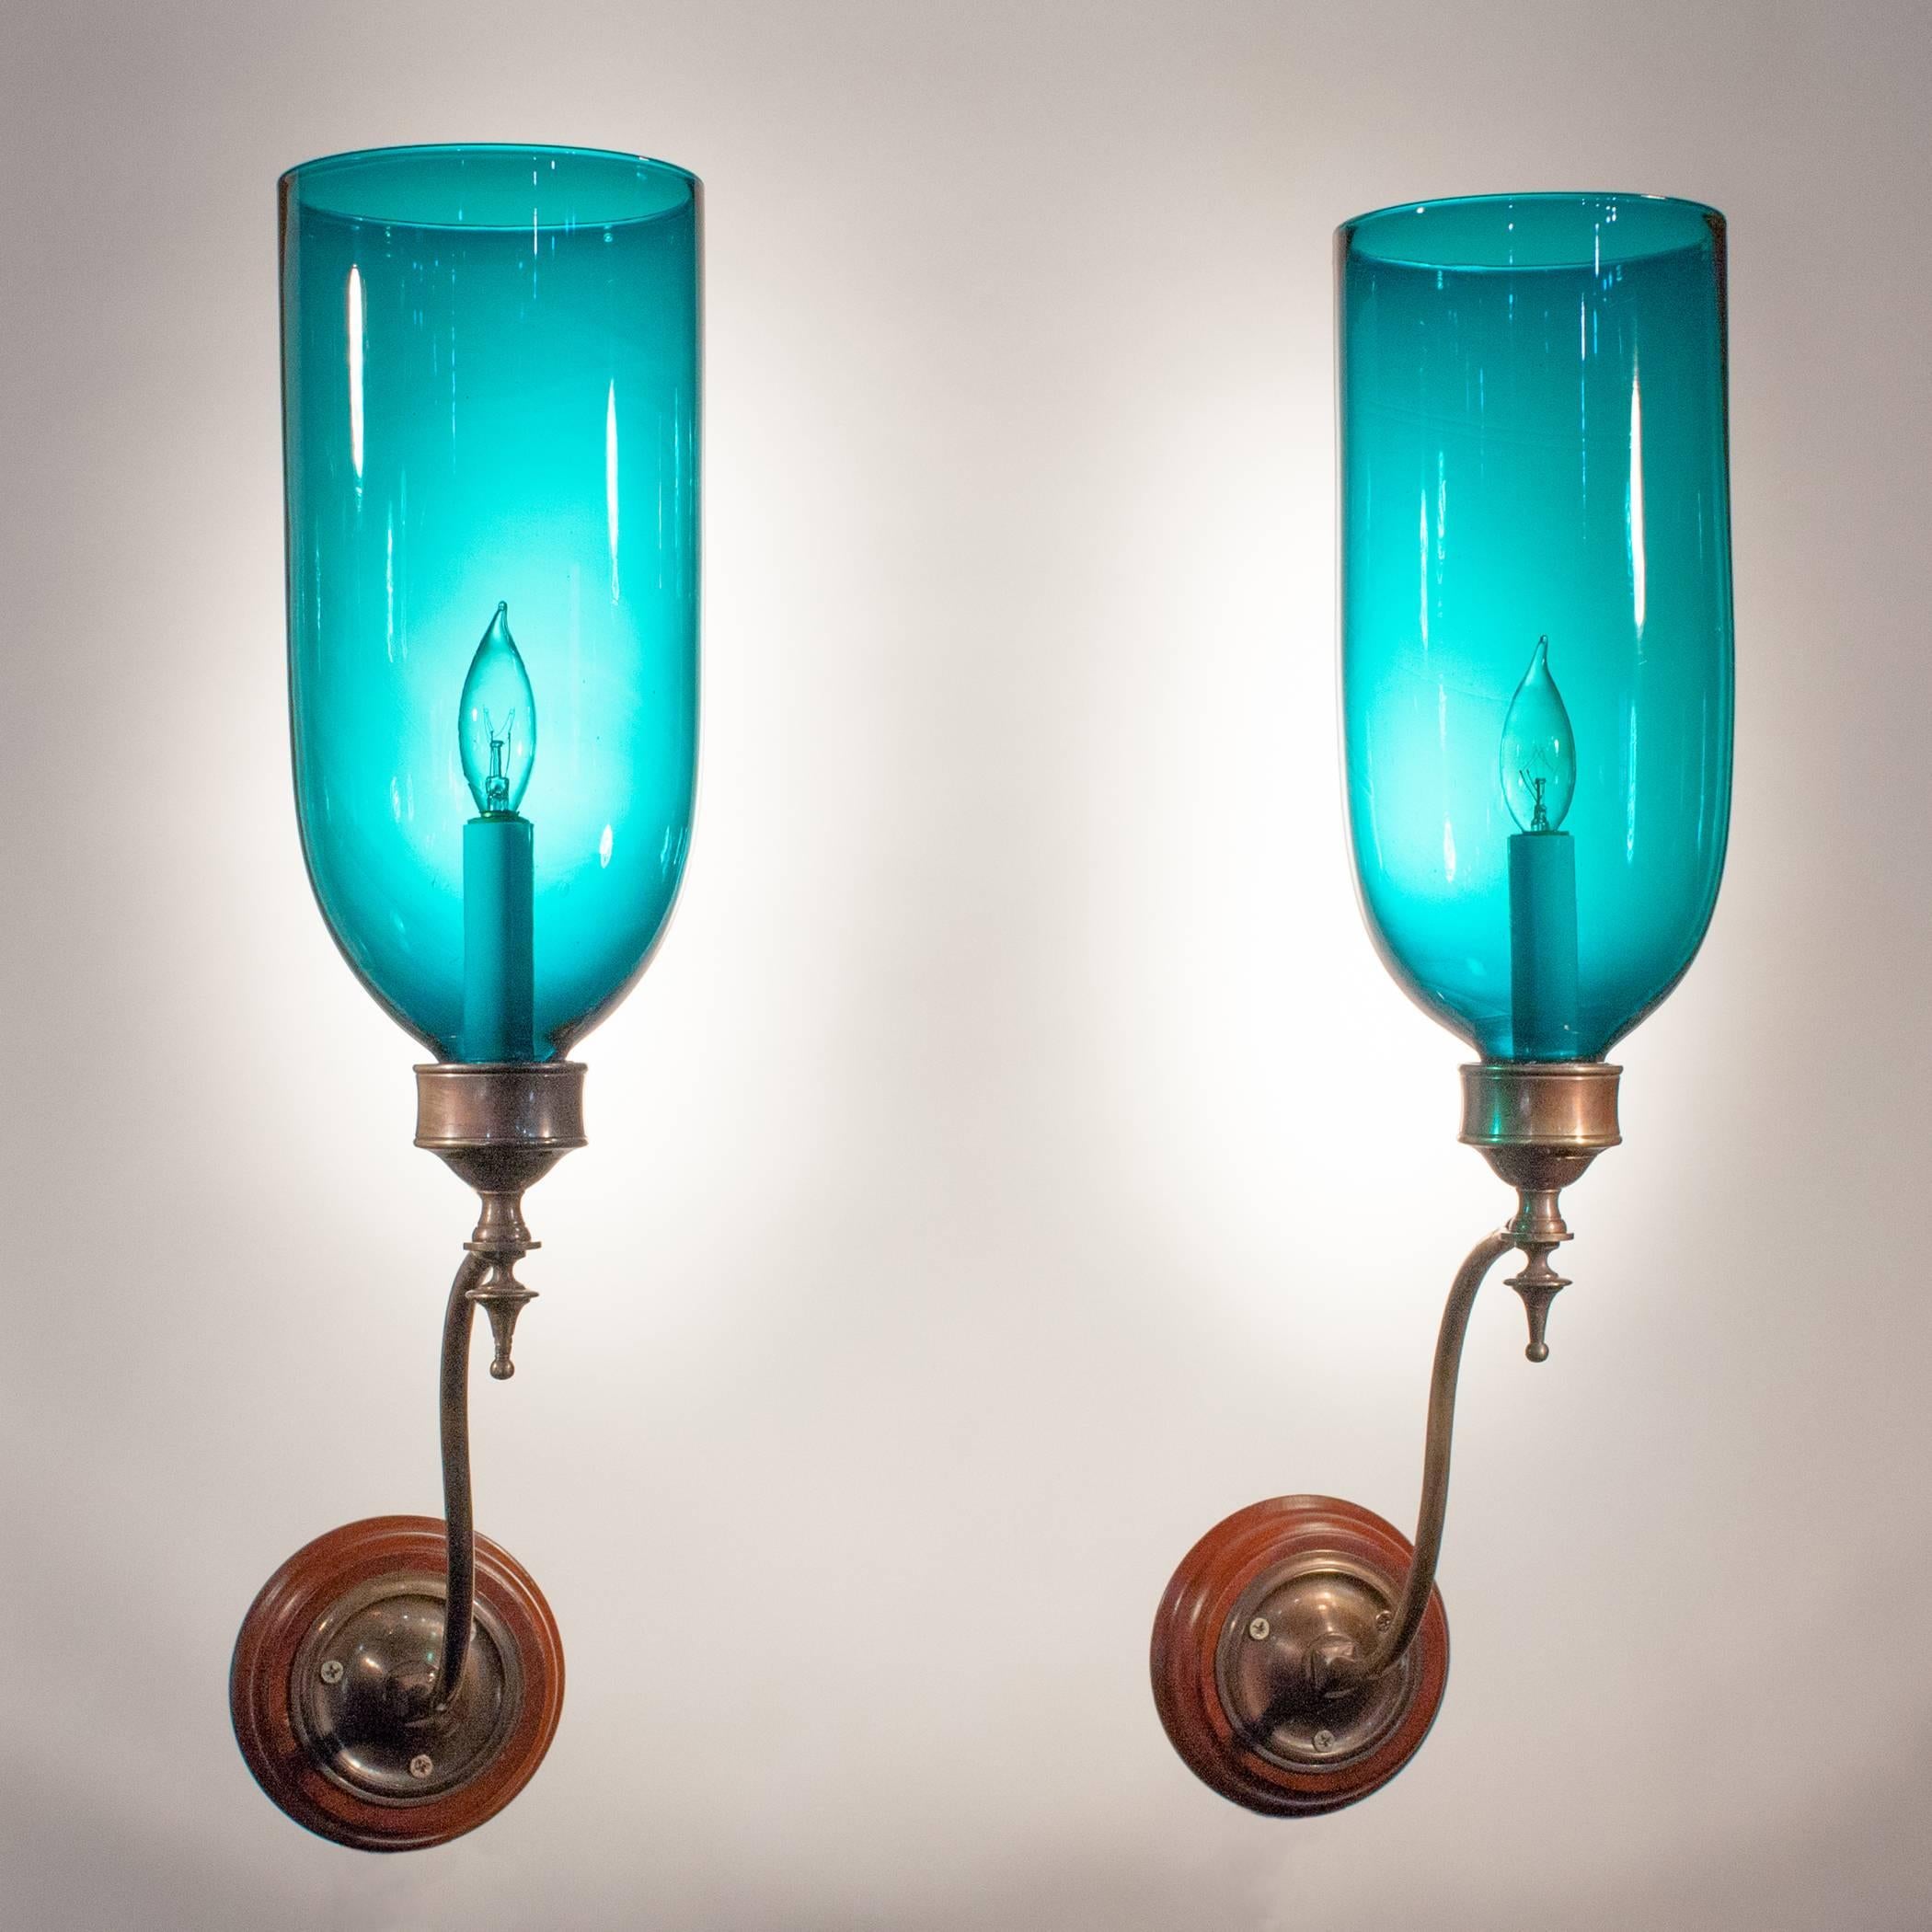 A rare pair of 19th century English hurricane sconces with a beautiful teal blue-green hue. These antique shades have desirable swirls and air bubbles that speak to the quality and age of the hand blown glass. The wall sconces are newly electrified,